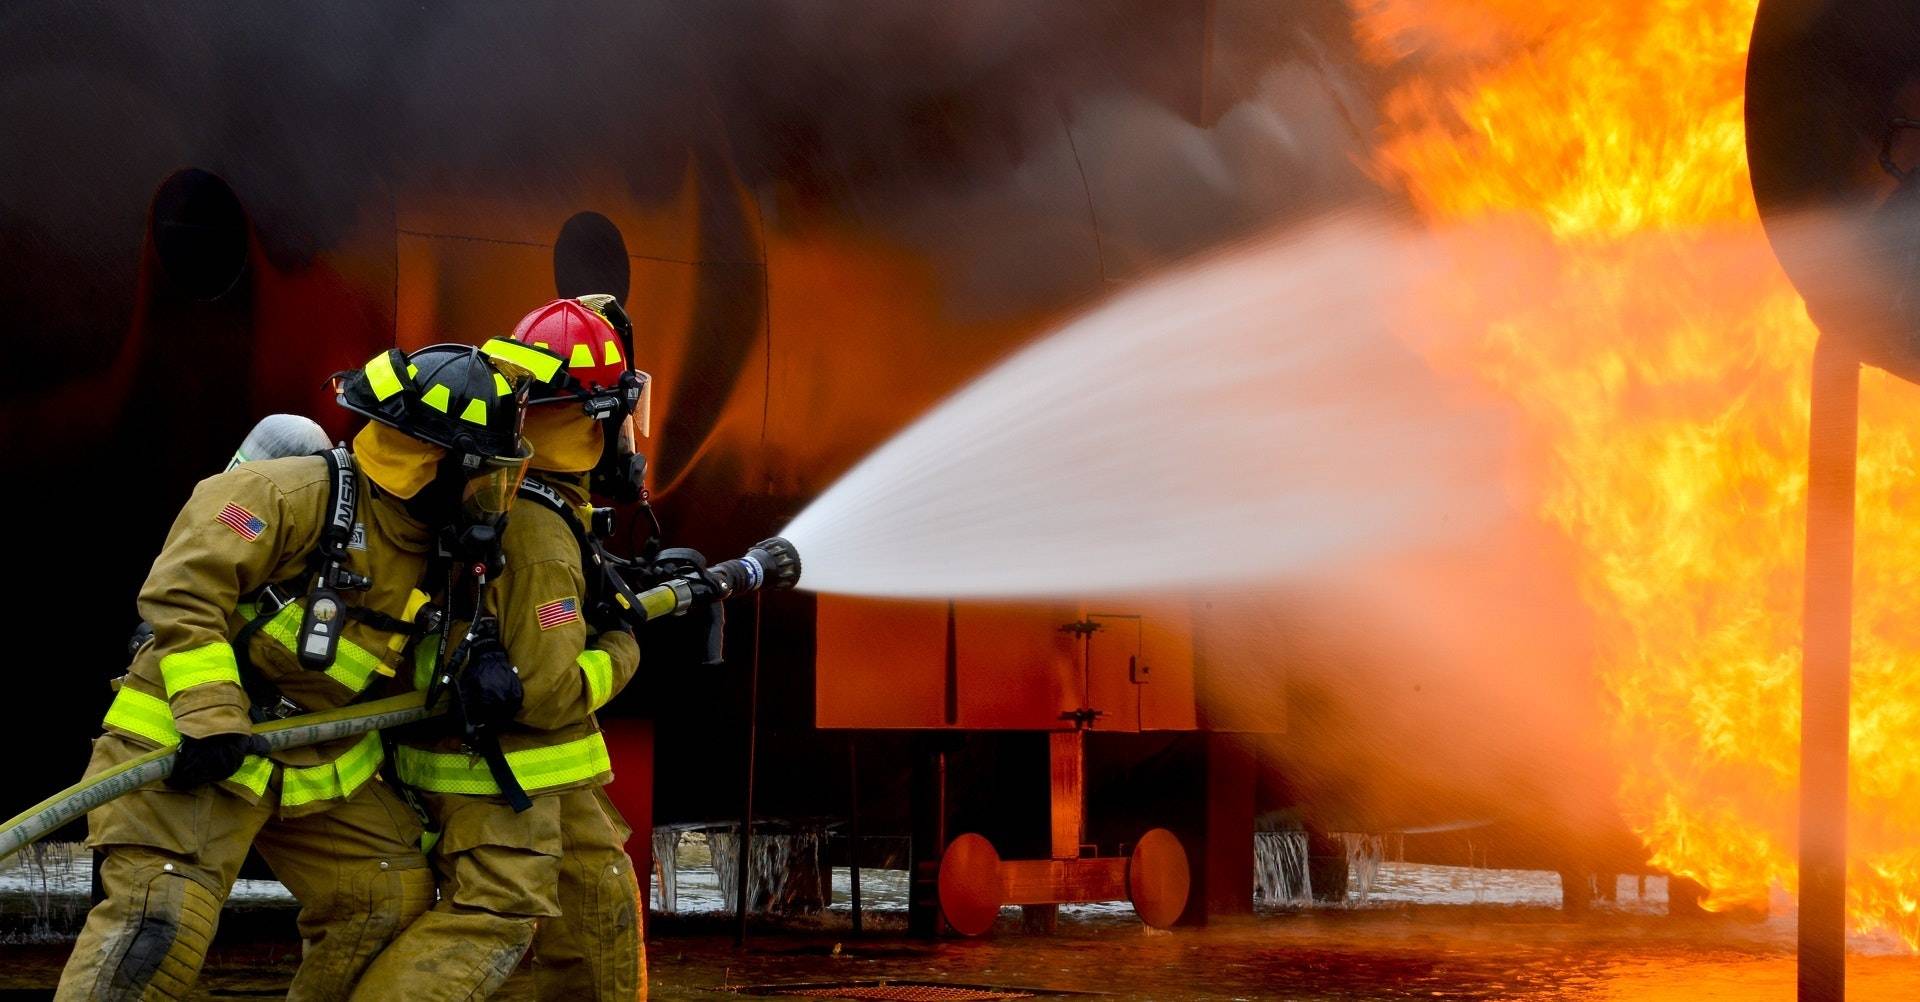 Fire Safety 101: Classifying and Extinguishing Fires